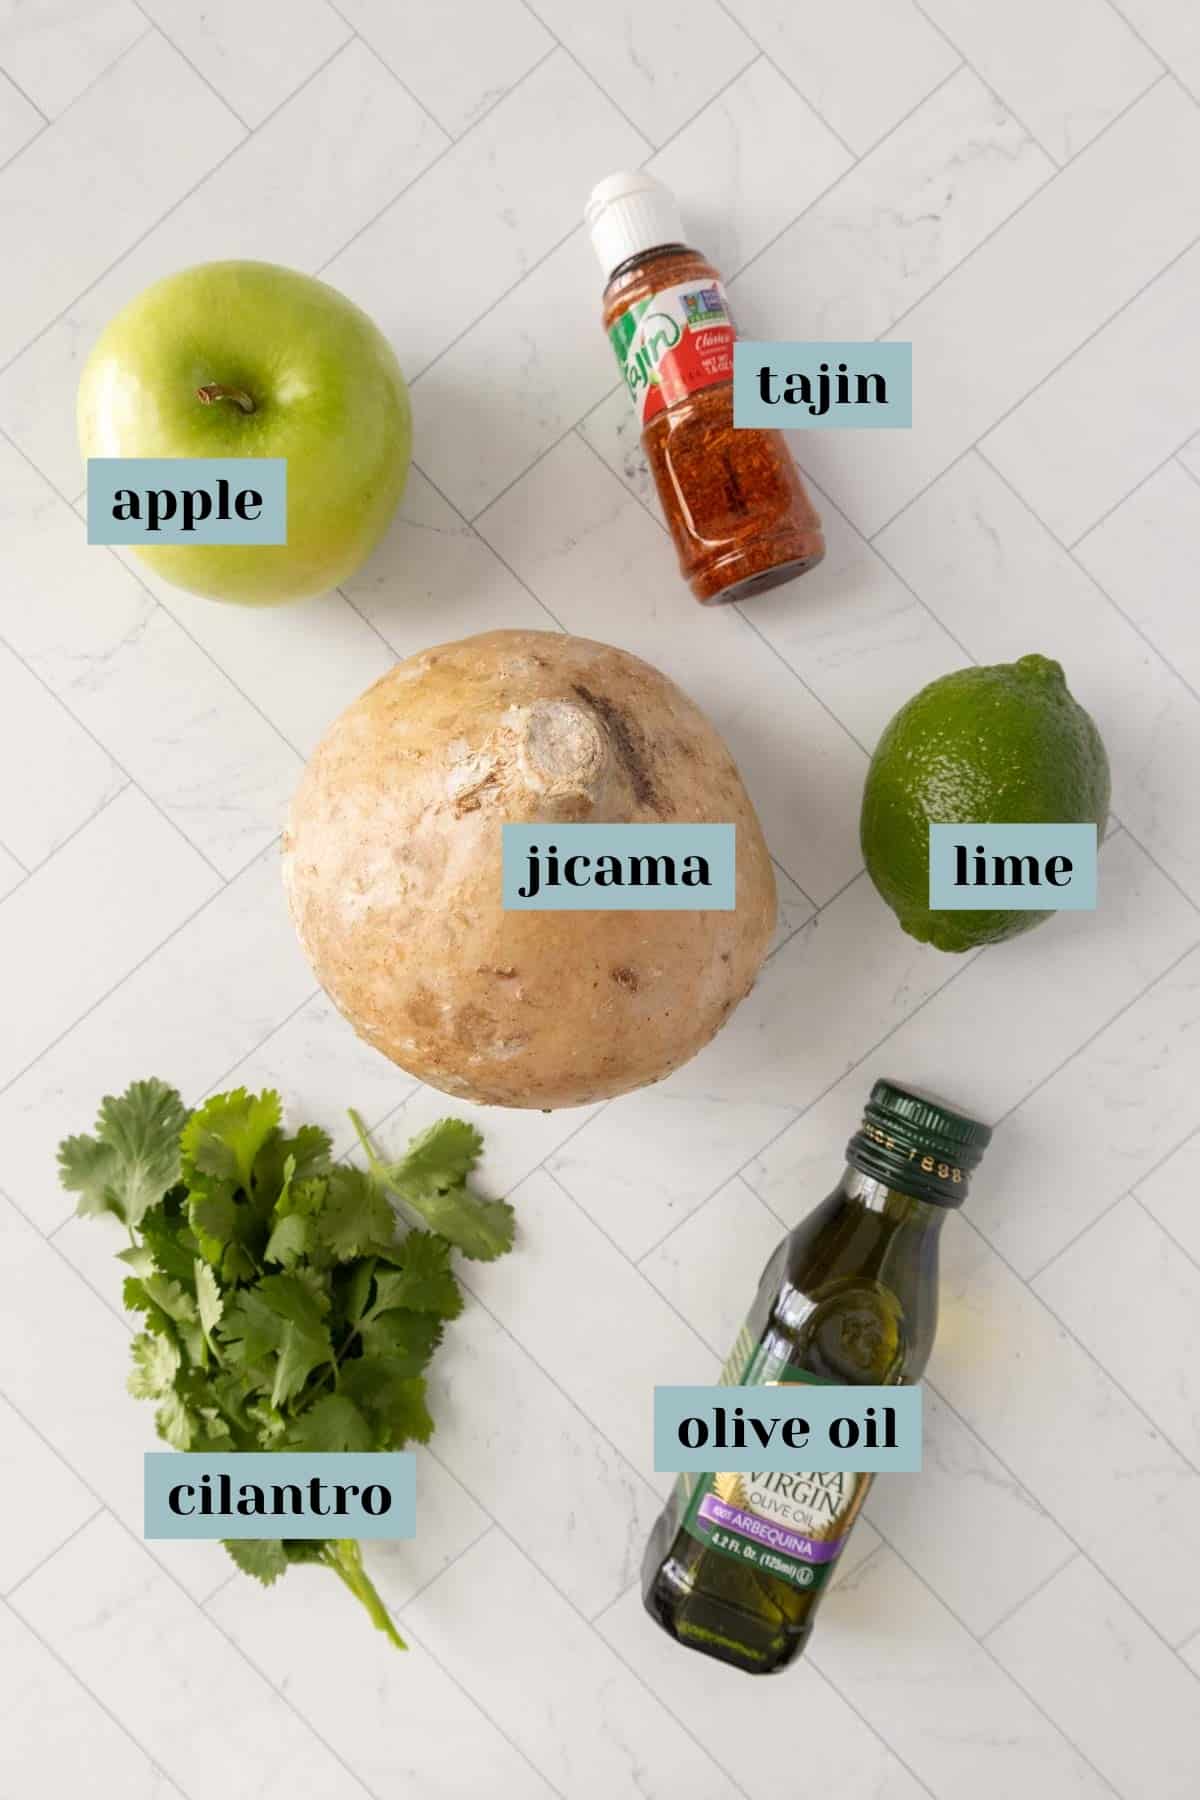 The ingredients for a jicama salad are laid out on a marble countertop.